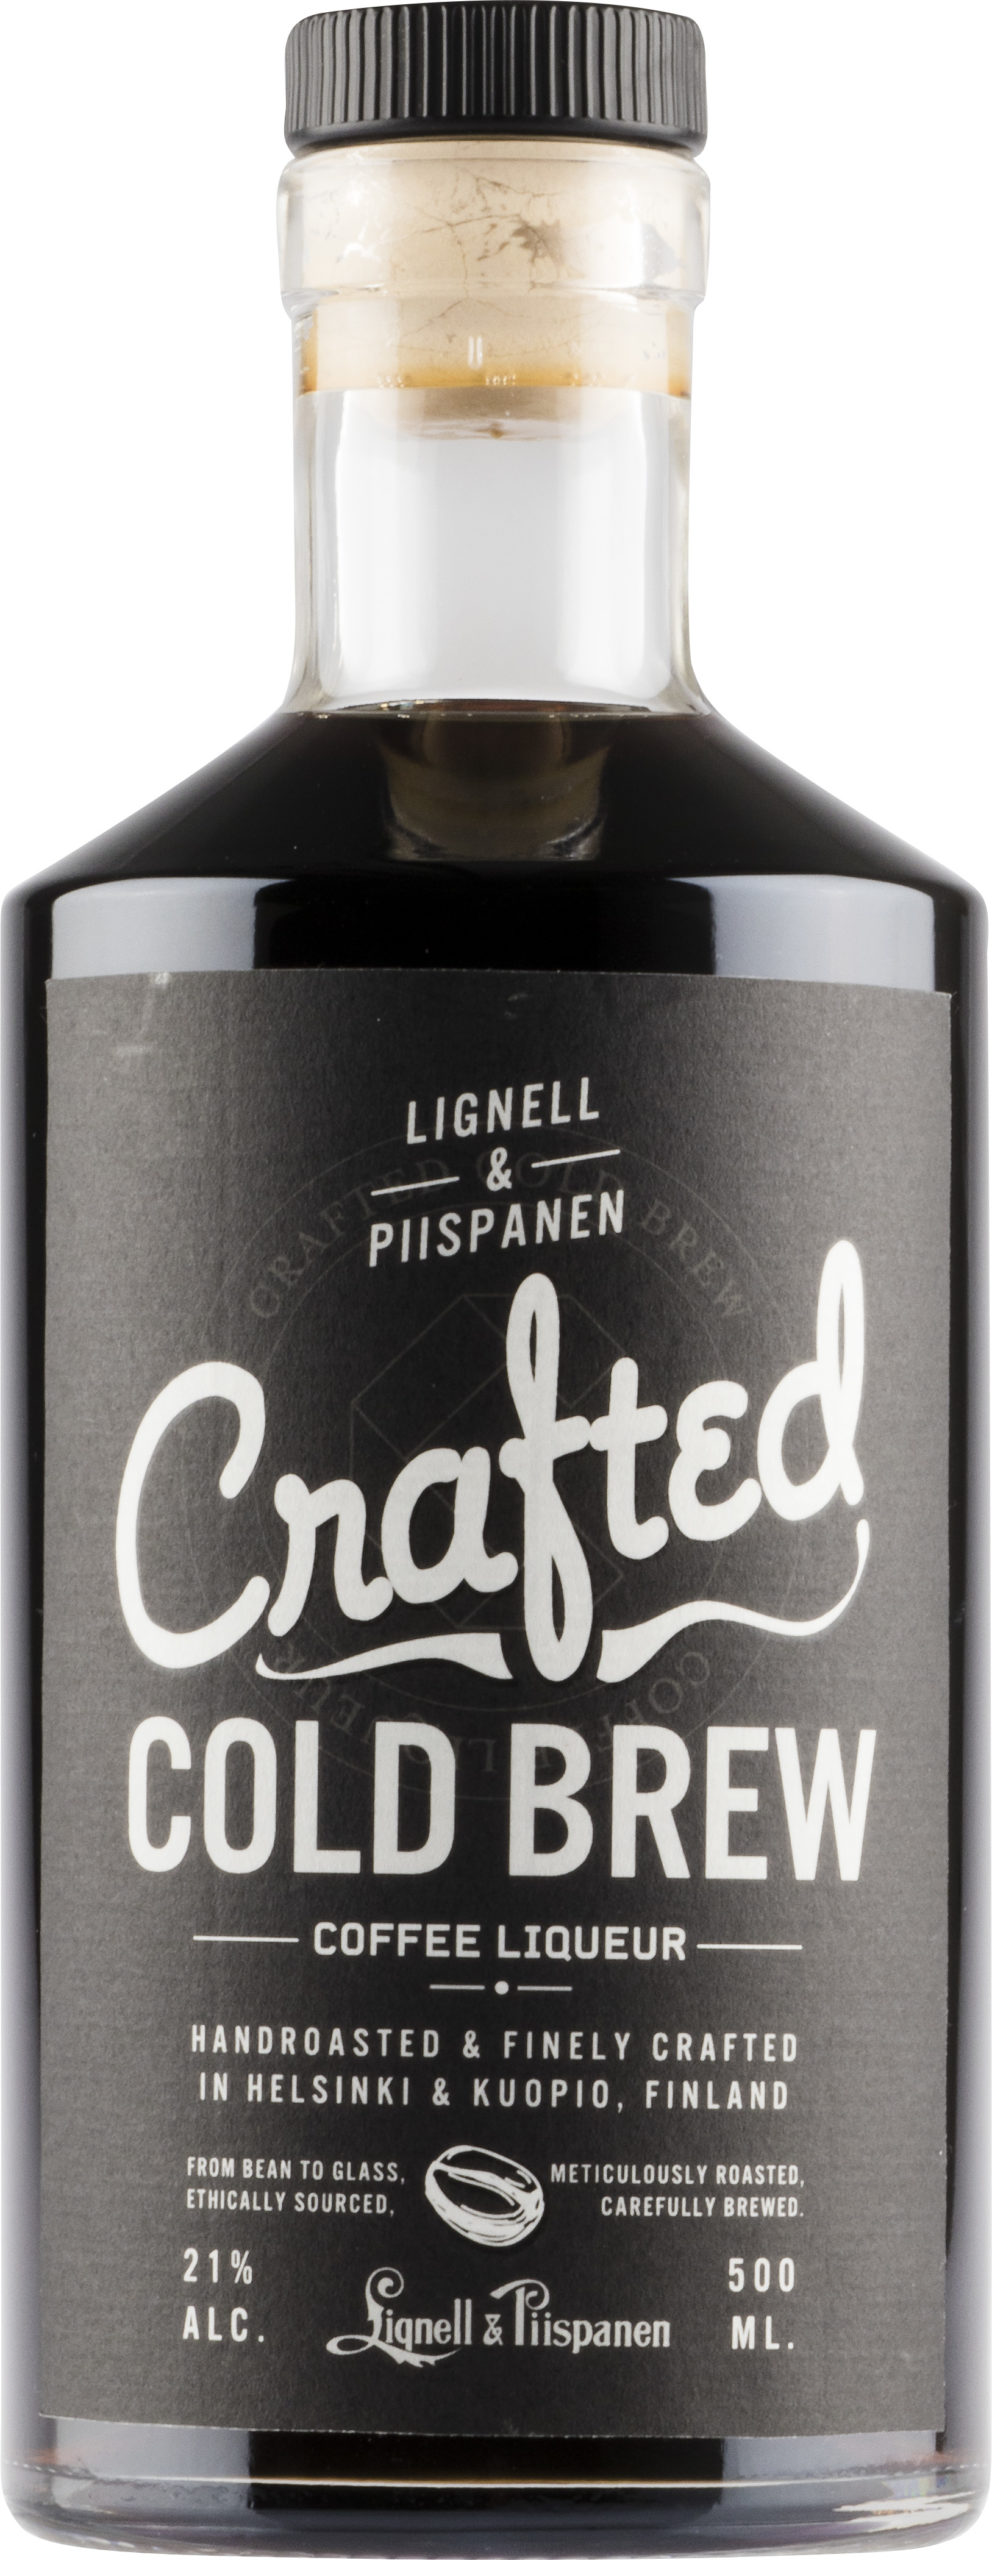 Crafted Cold Brew Coffee Liqueur